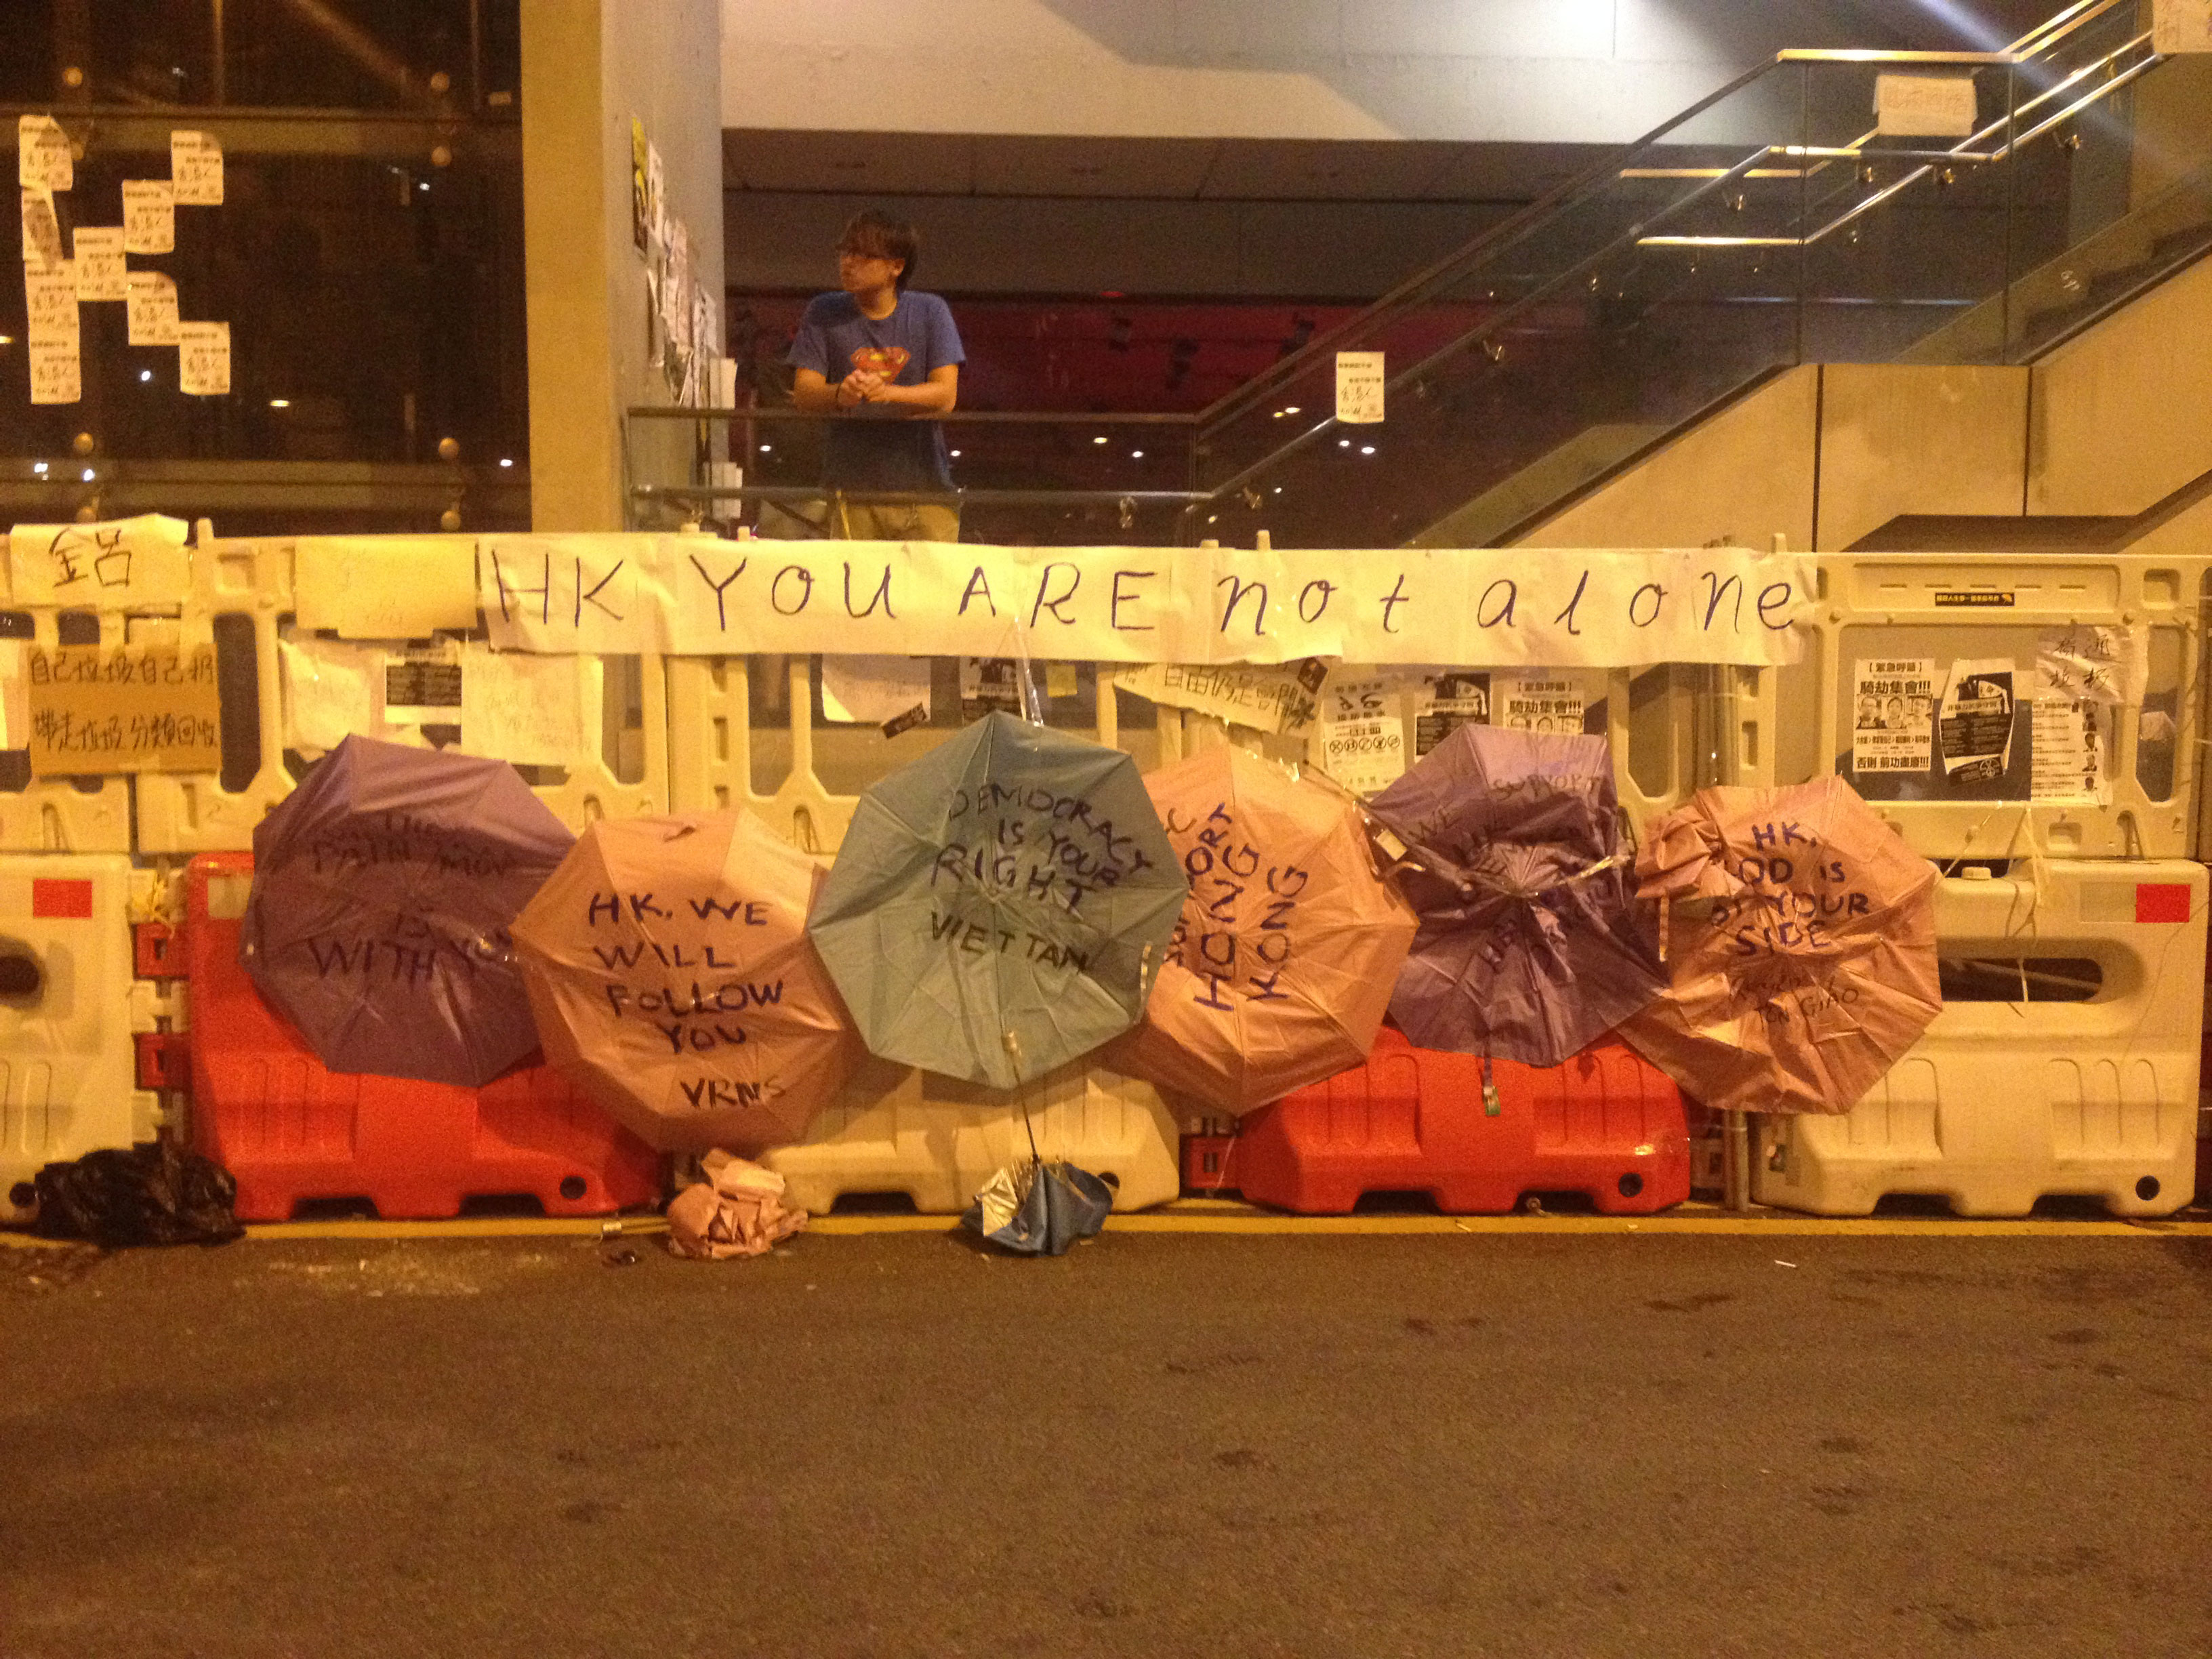 One of the signs from the Umbrella Movement, October 2014.